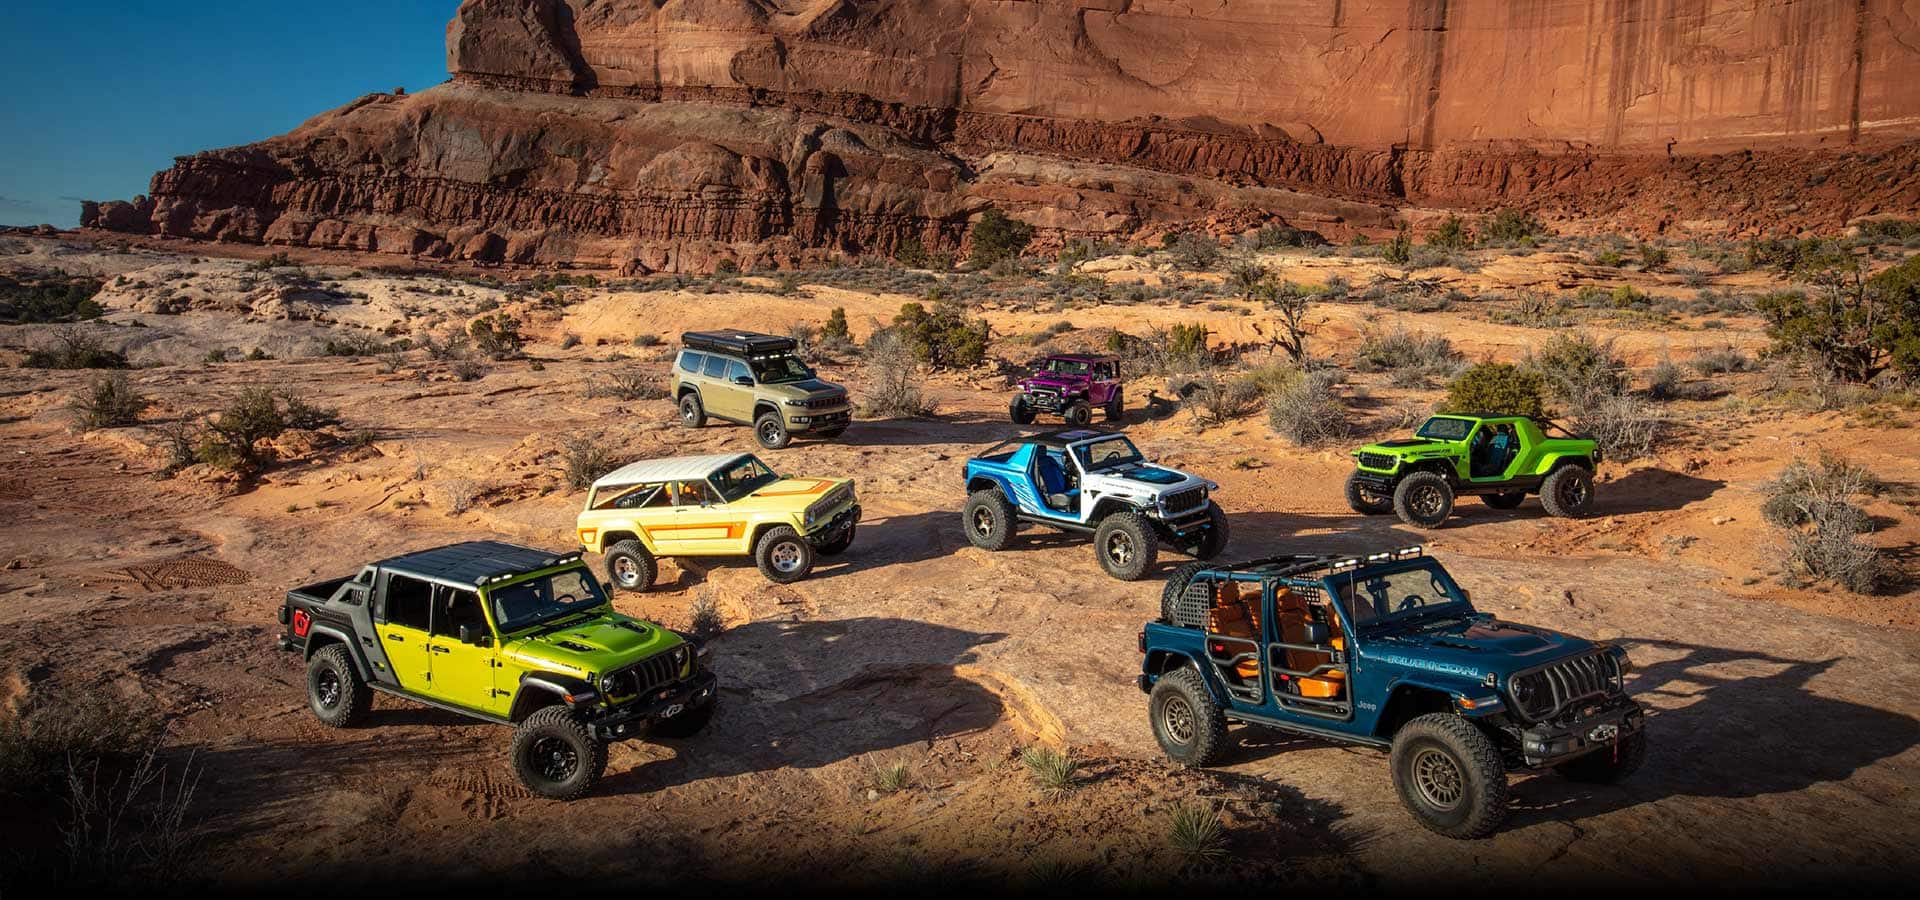 A grouping of seven Jeep Concept vehicles parked randomly in the desert.